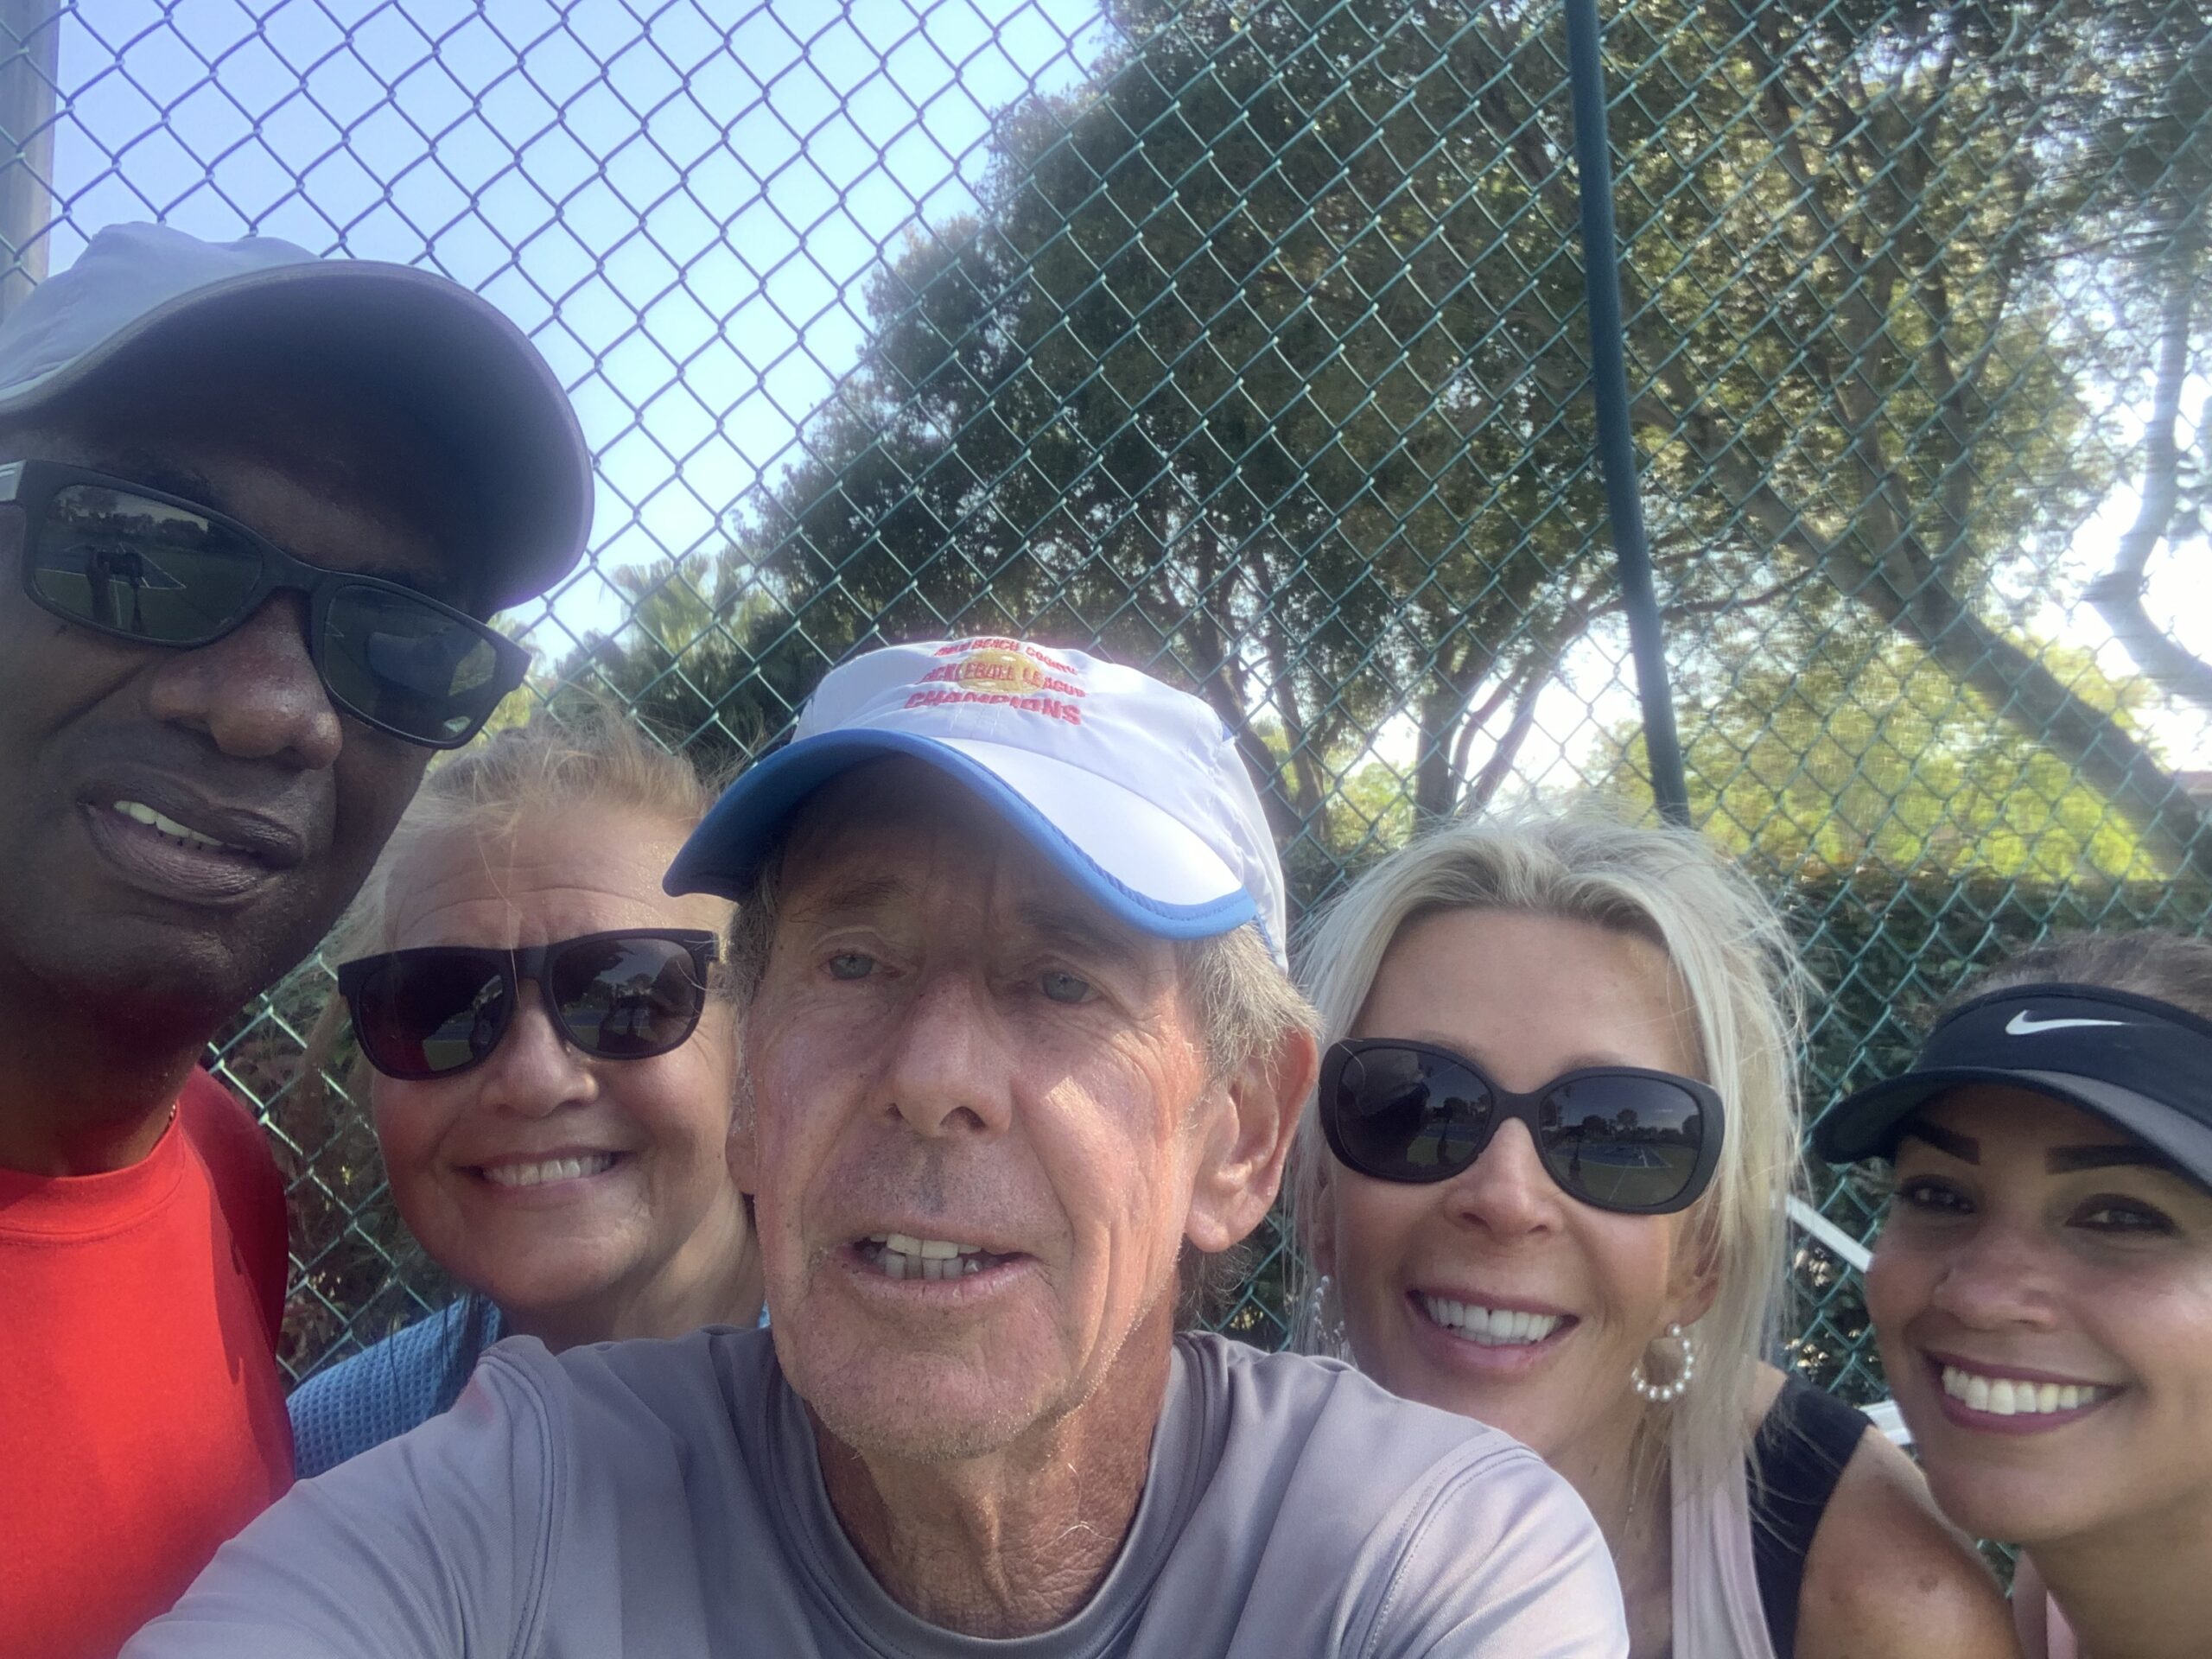 Bob with Alexa, Alton, Meredith, and Regna after a Beginners' Pickleball Clinic in Delray Beach, FL